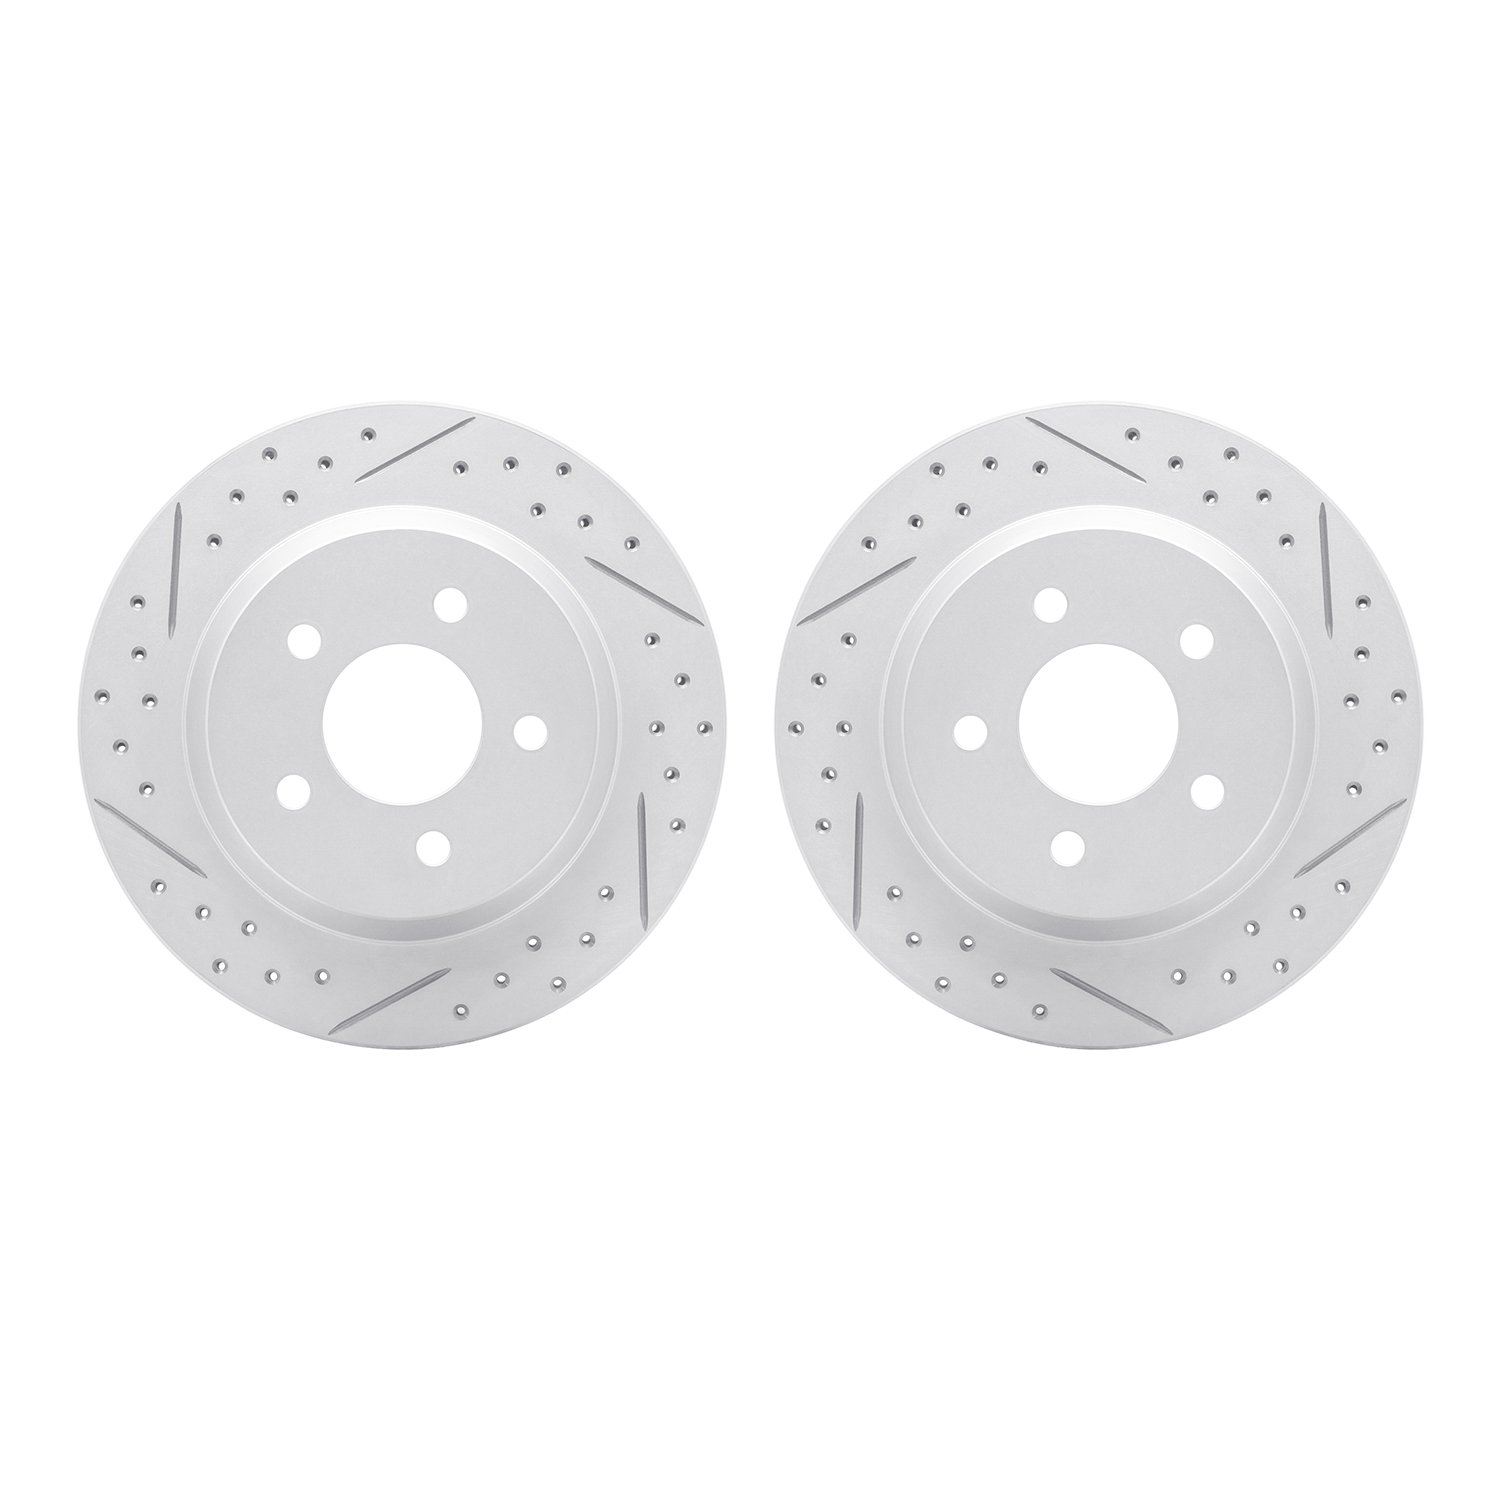 2002-54166 Geoperformance Drilled/Slotted Brake Rotors, 1994-2004 Ford/Lincoln/Mercury/Mazda, Position: Rear